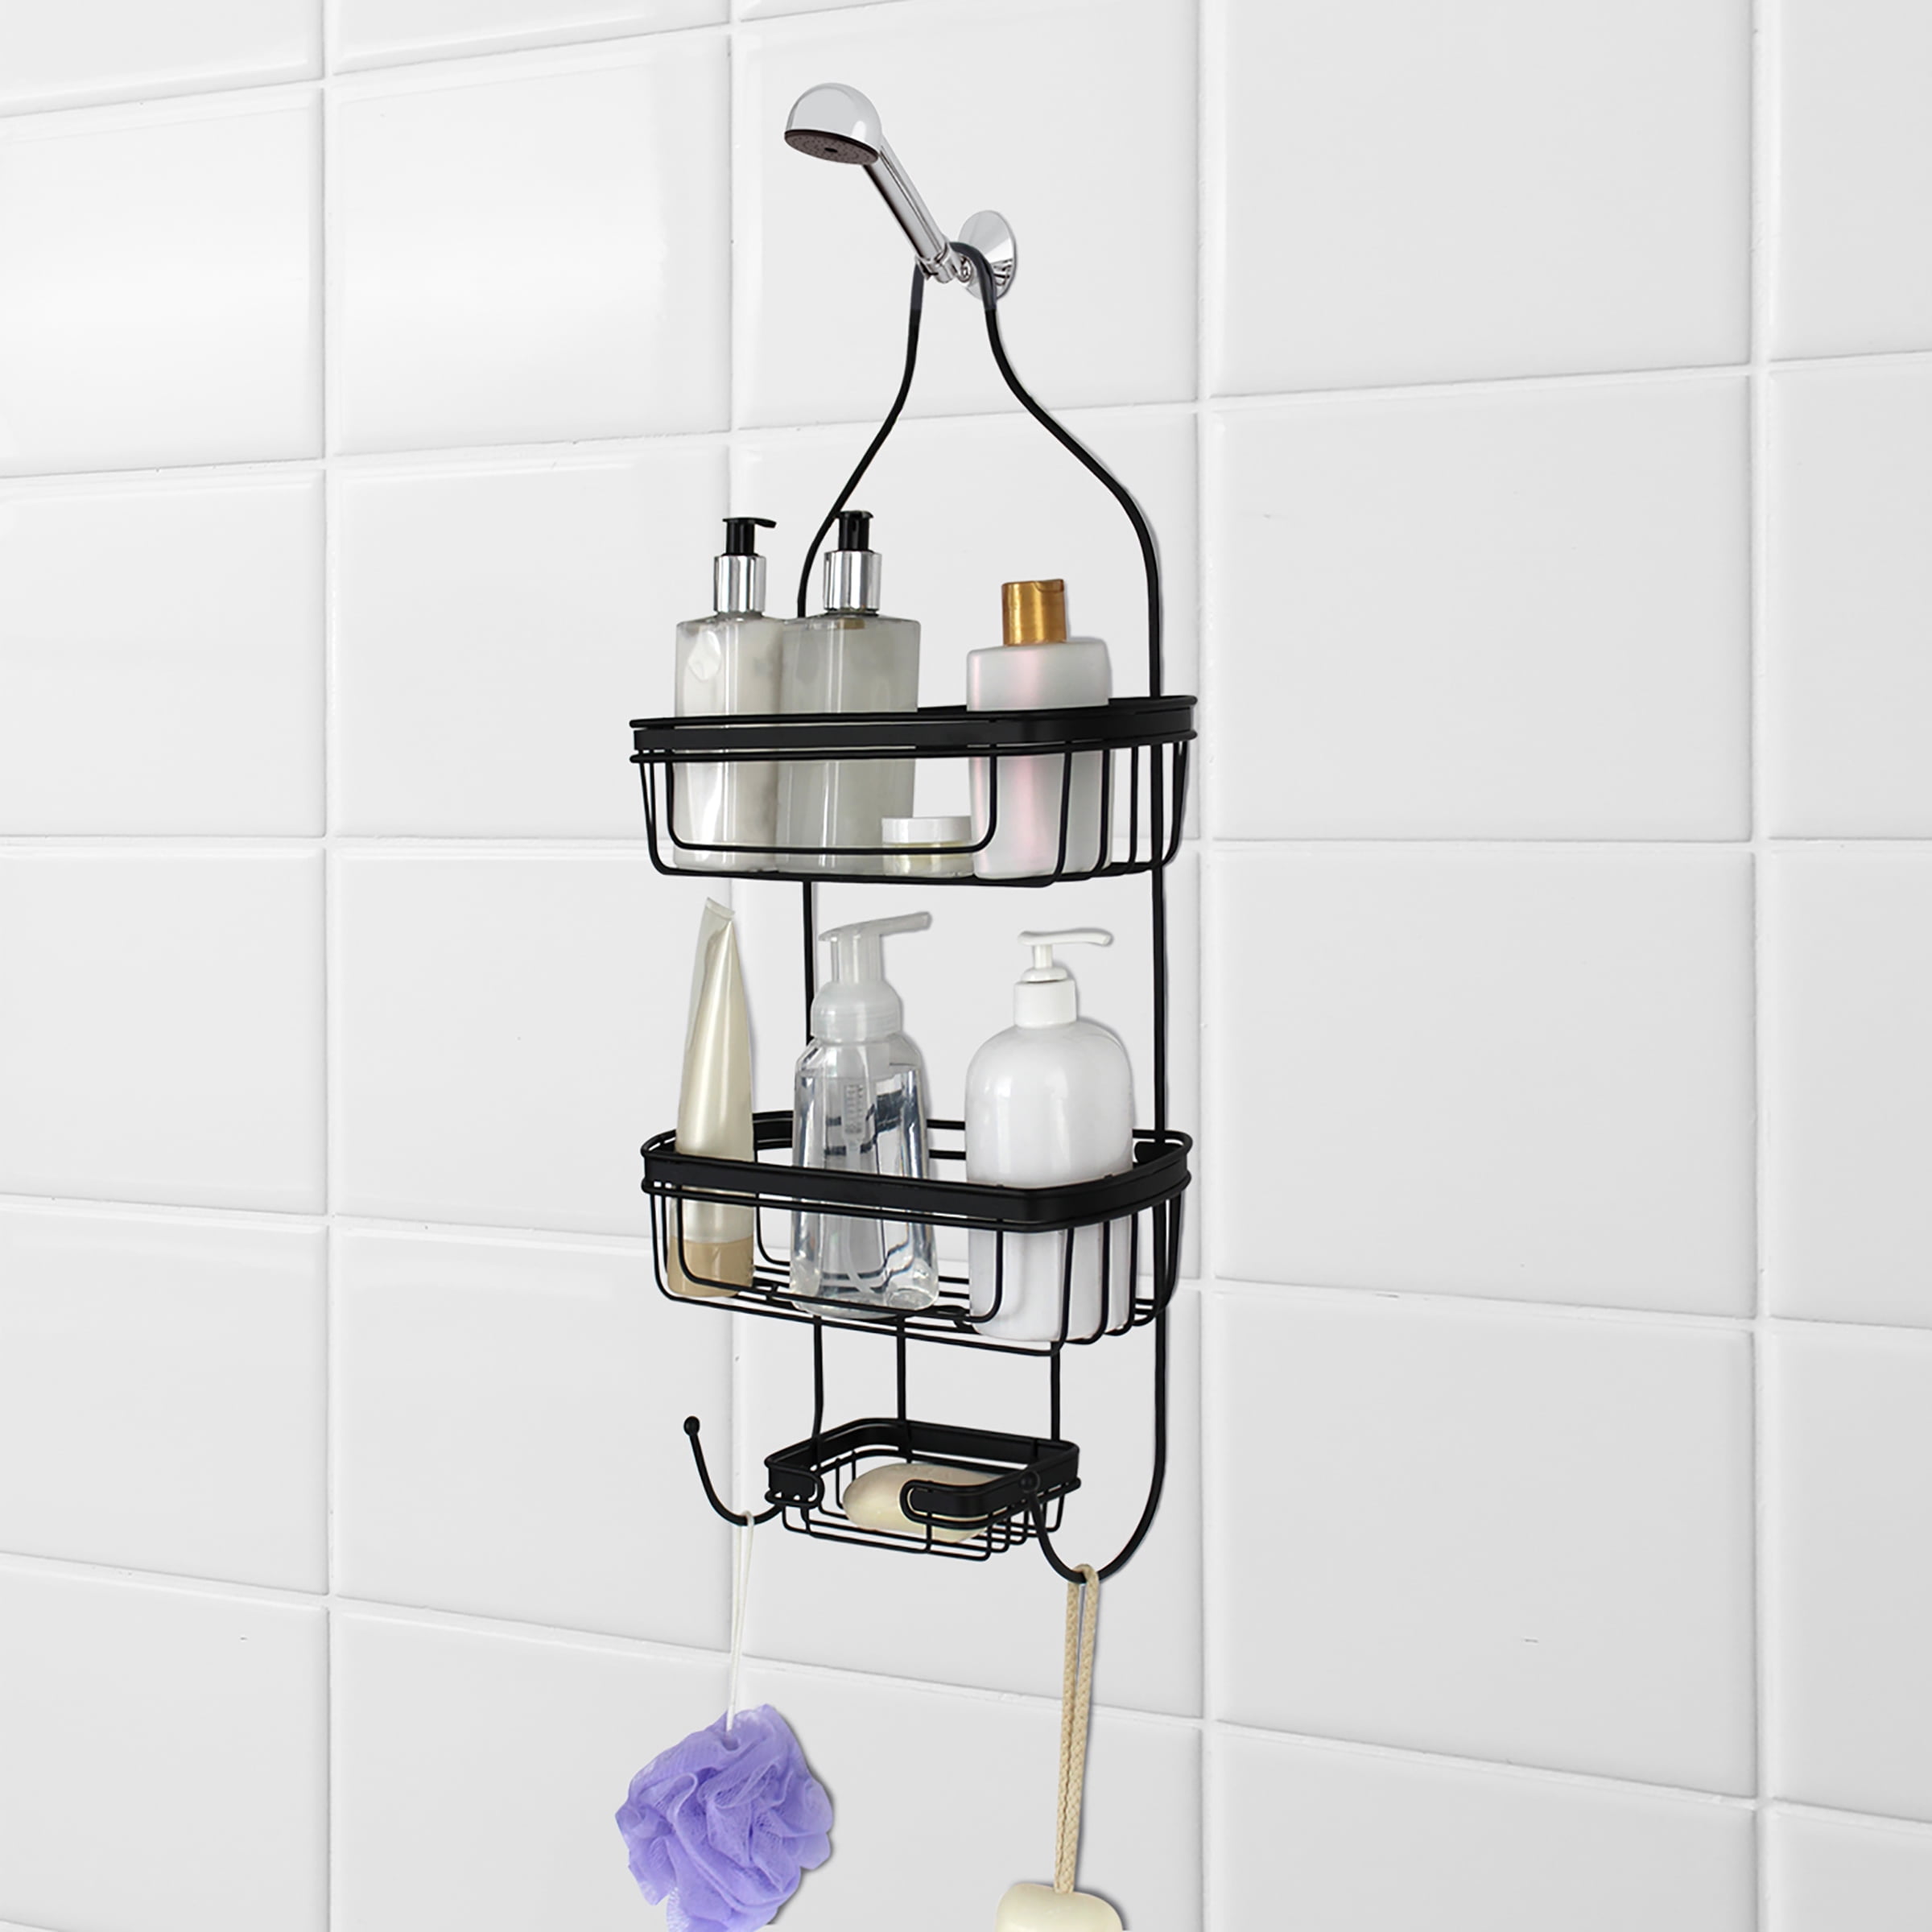 Home Basics NEW Chrome Large Shower Caddy with Soap Dish SC00519 